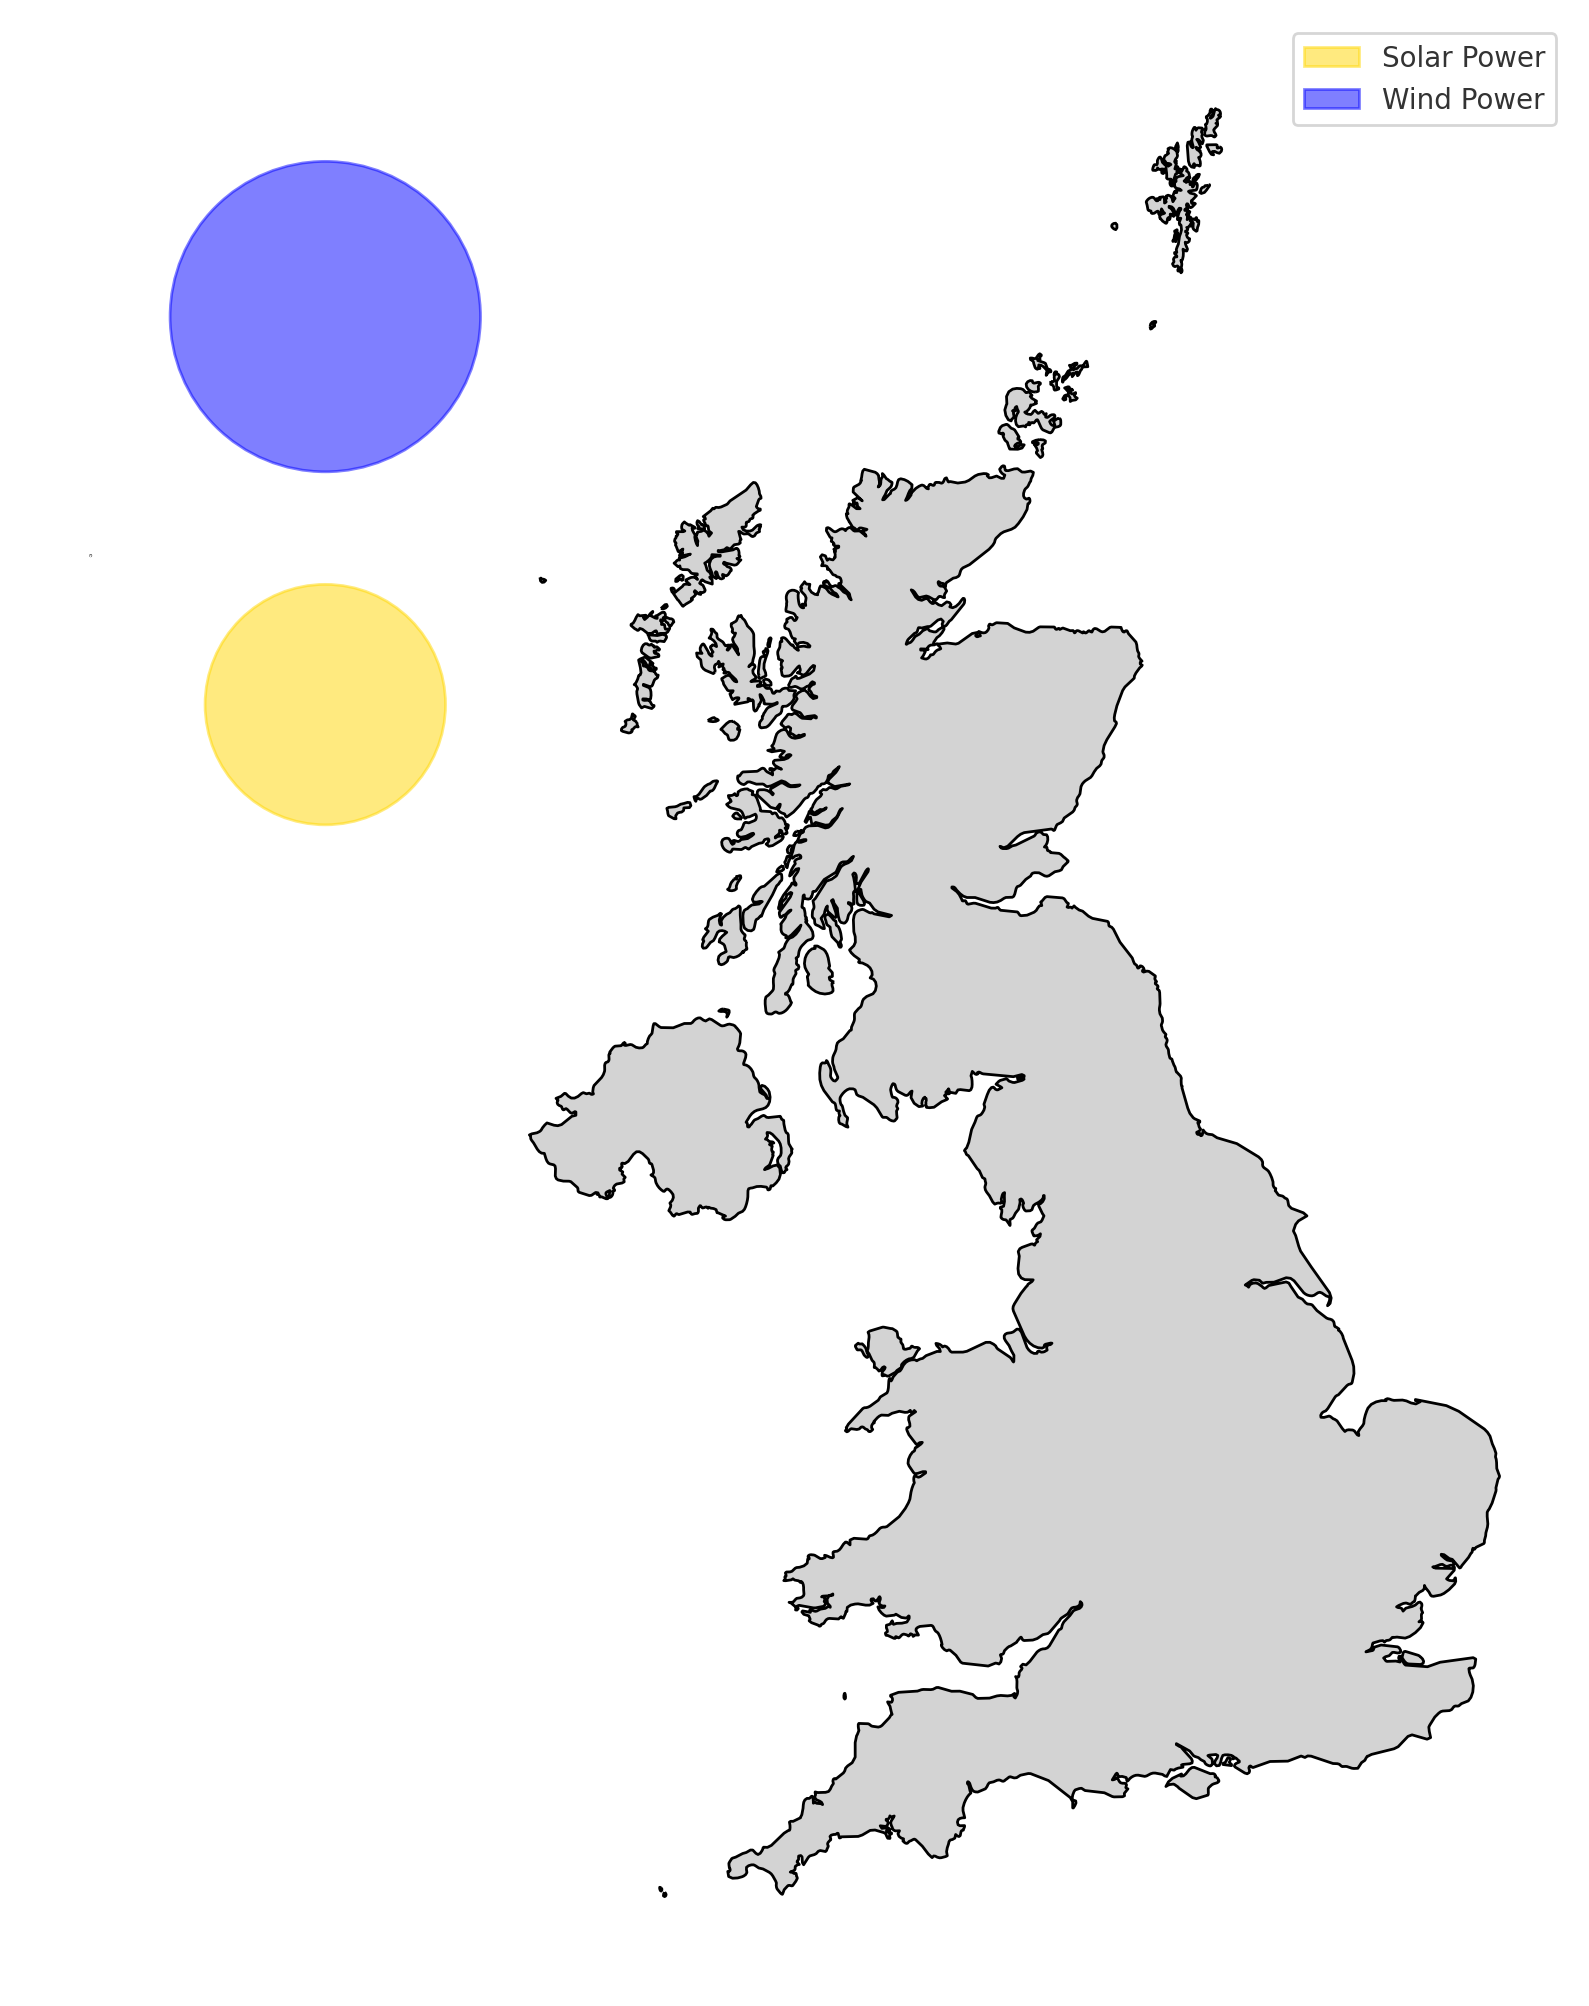 A map of the UK with the space efuel aviation fuel would require superimposed on top.